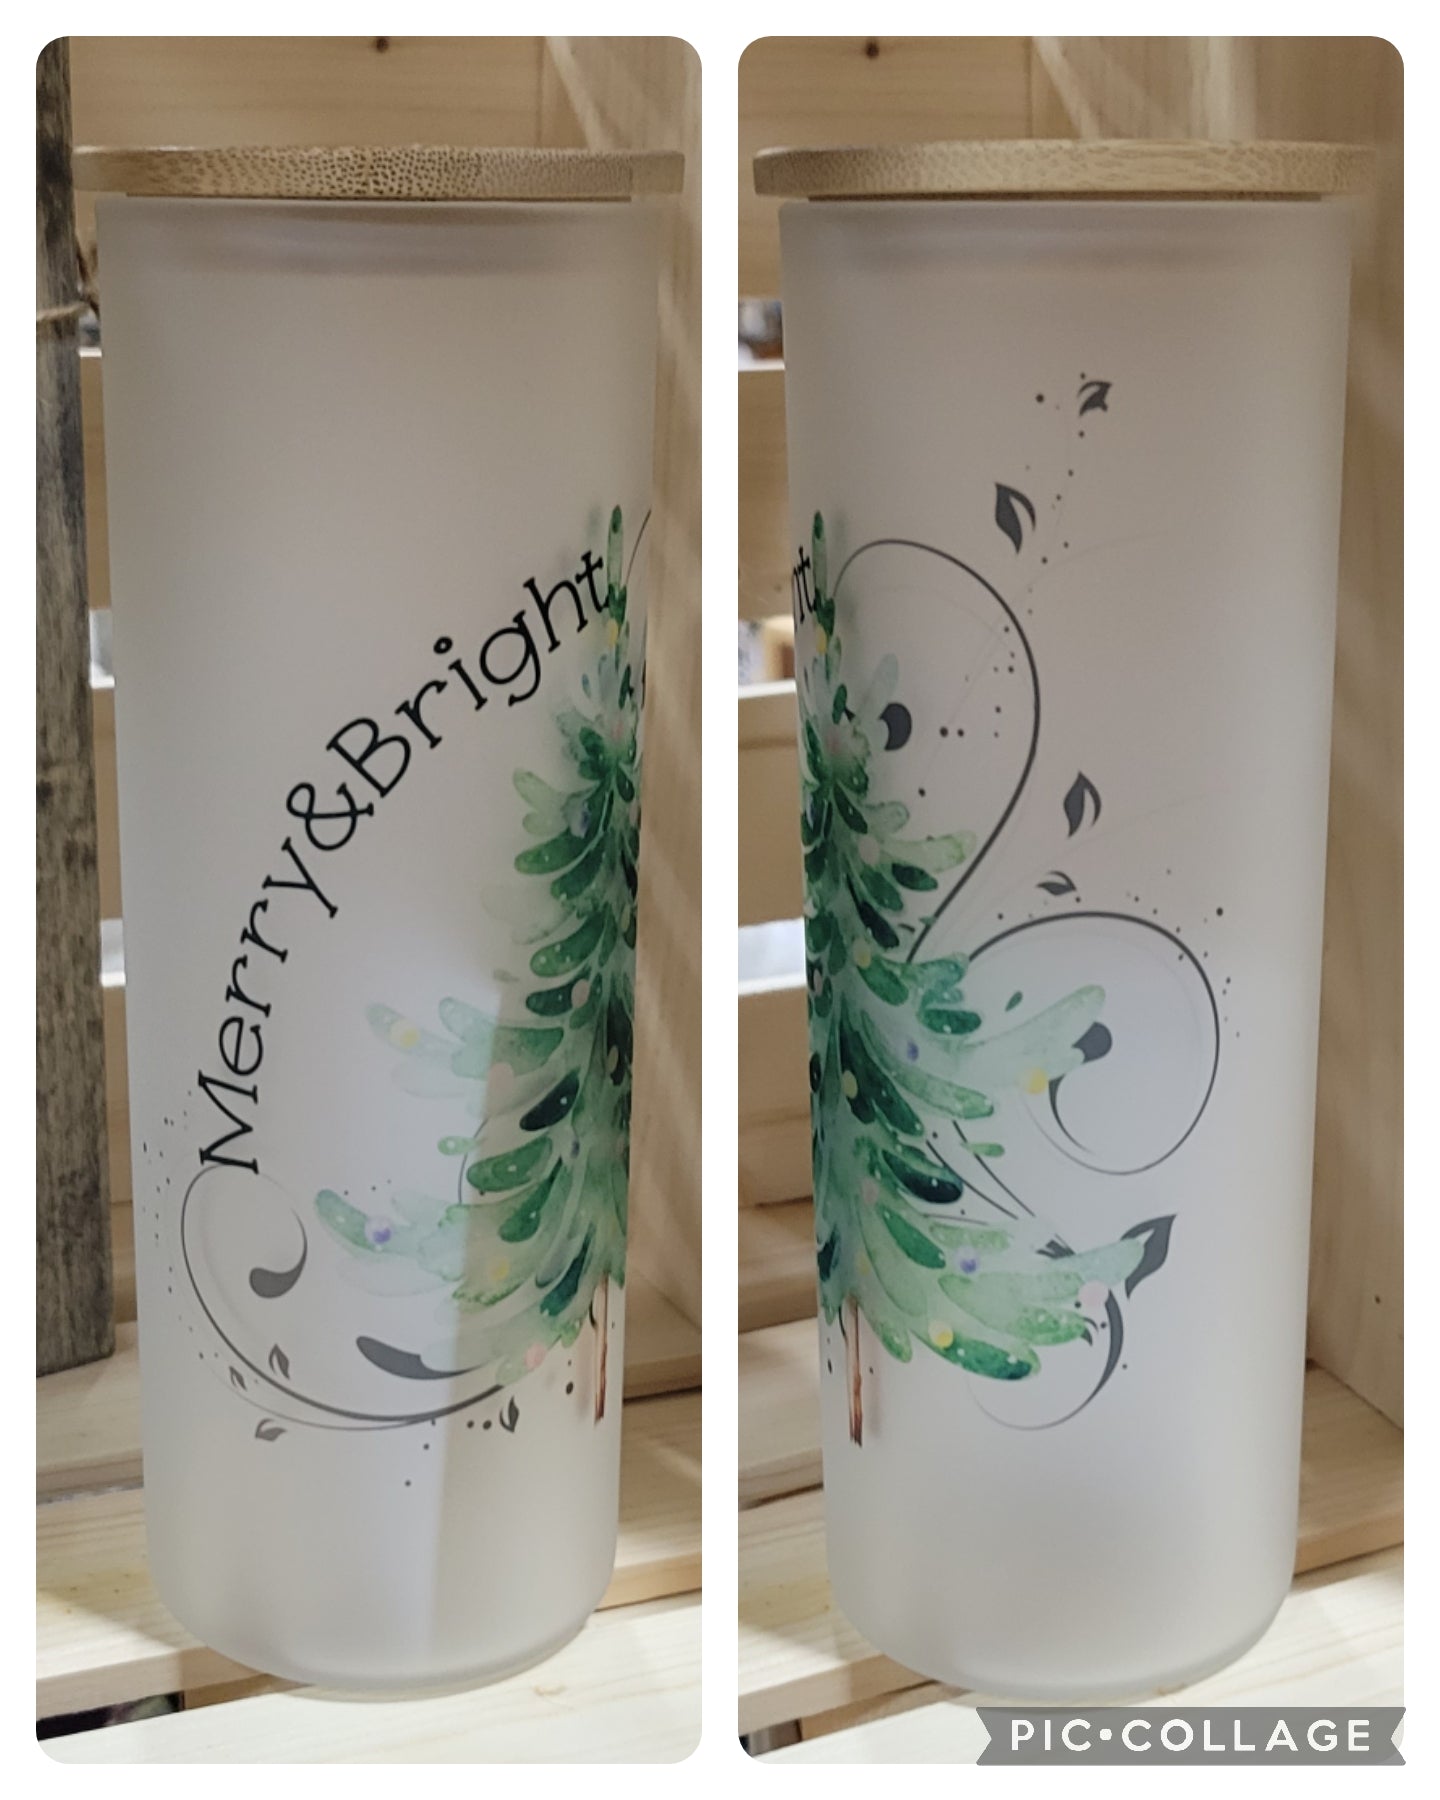 25oz frosted glass cups - Christmas designs